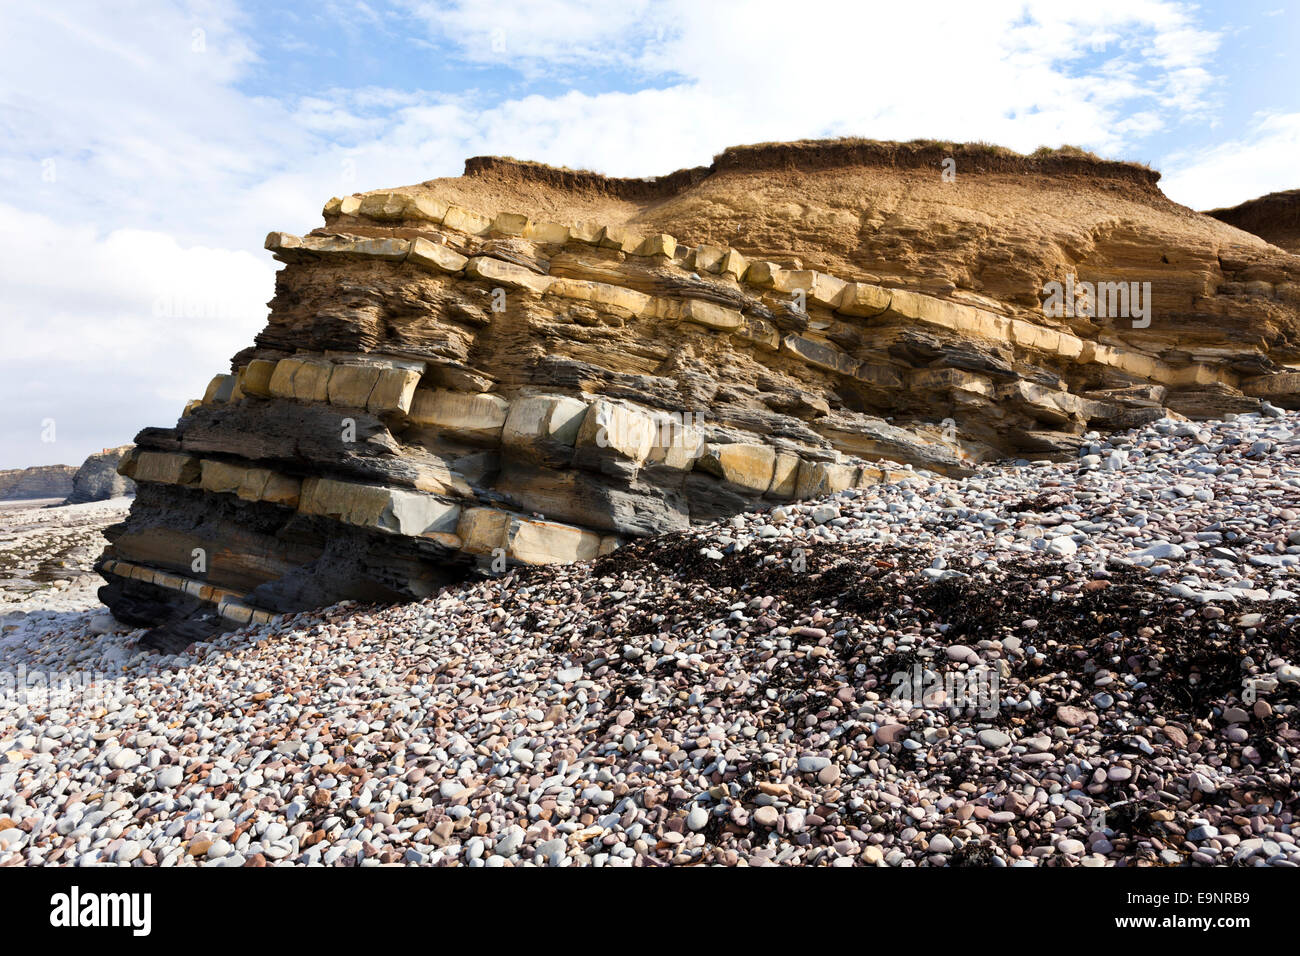 Geological rock strata at Kilve Beach, Somerset UK - Part of a larger Site of Special Scientific Interest (SSSI) Stock Photo